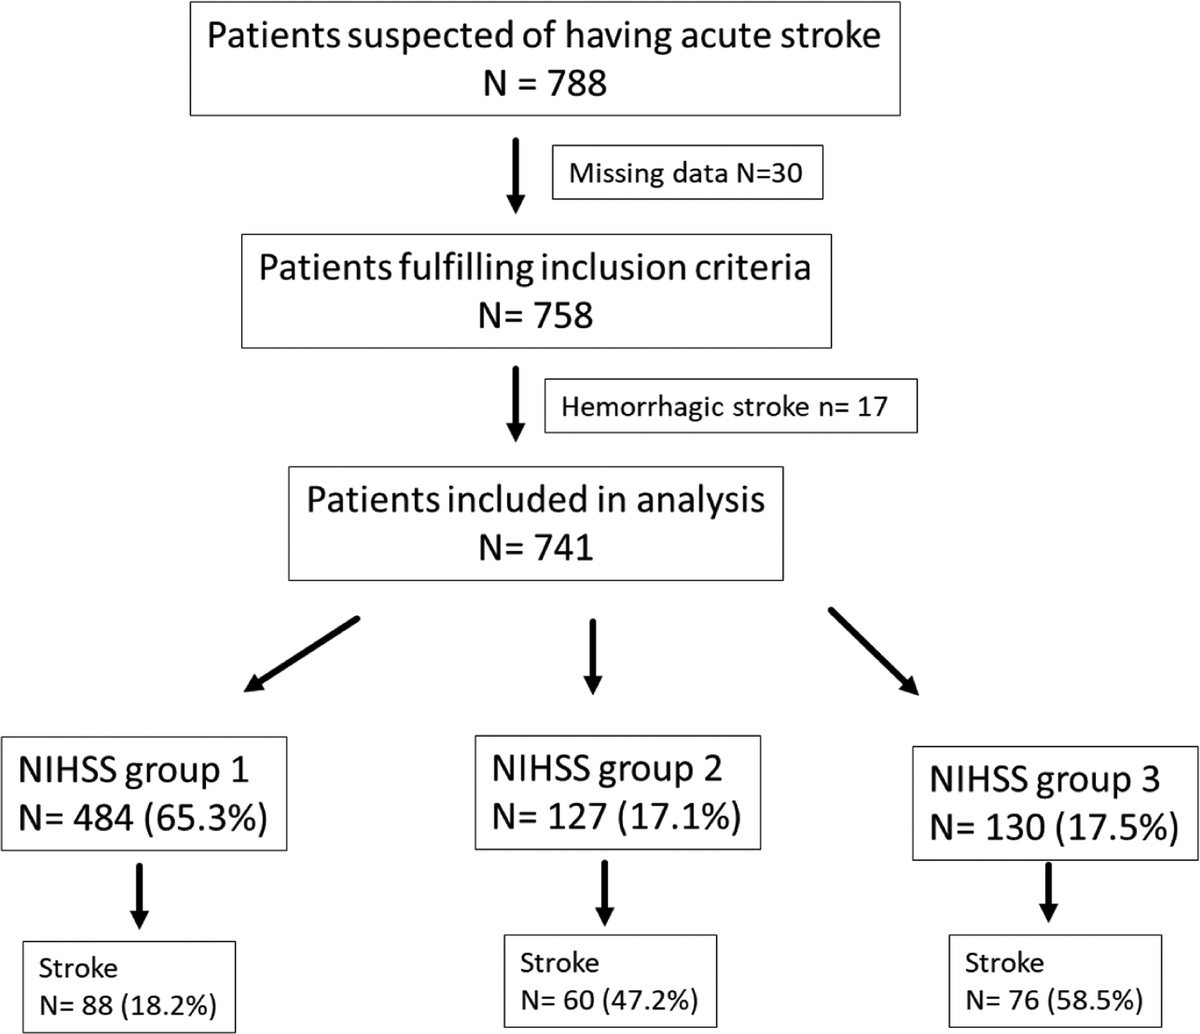 Diagnostic Value of Computed Tomography Angiography in Suspected Acute Ischemic Stroke Patients With Respect to National Institutes of Health Stroke Scale Score